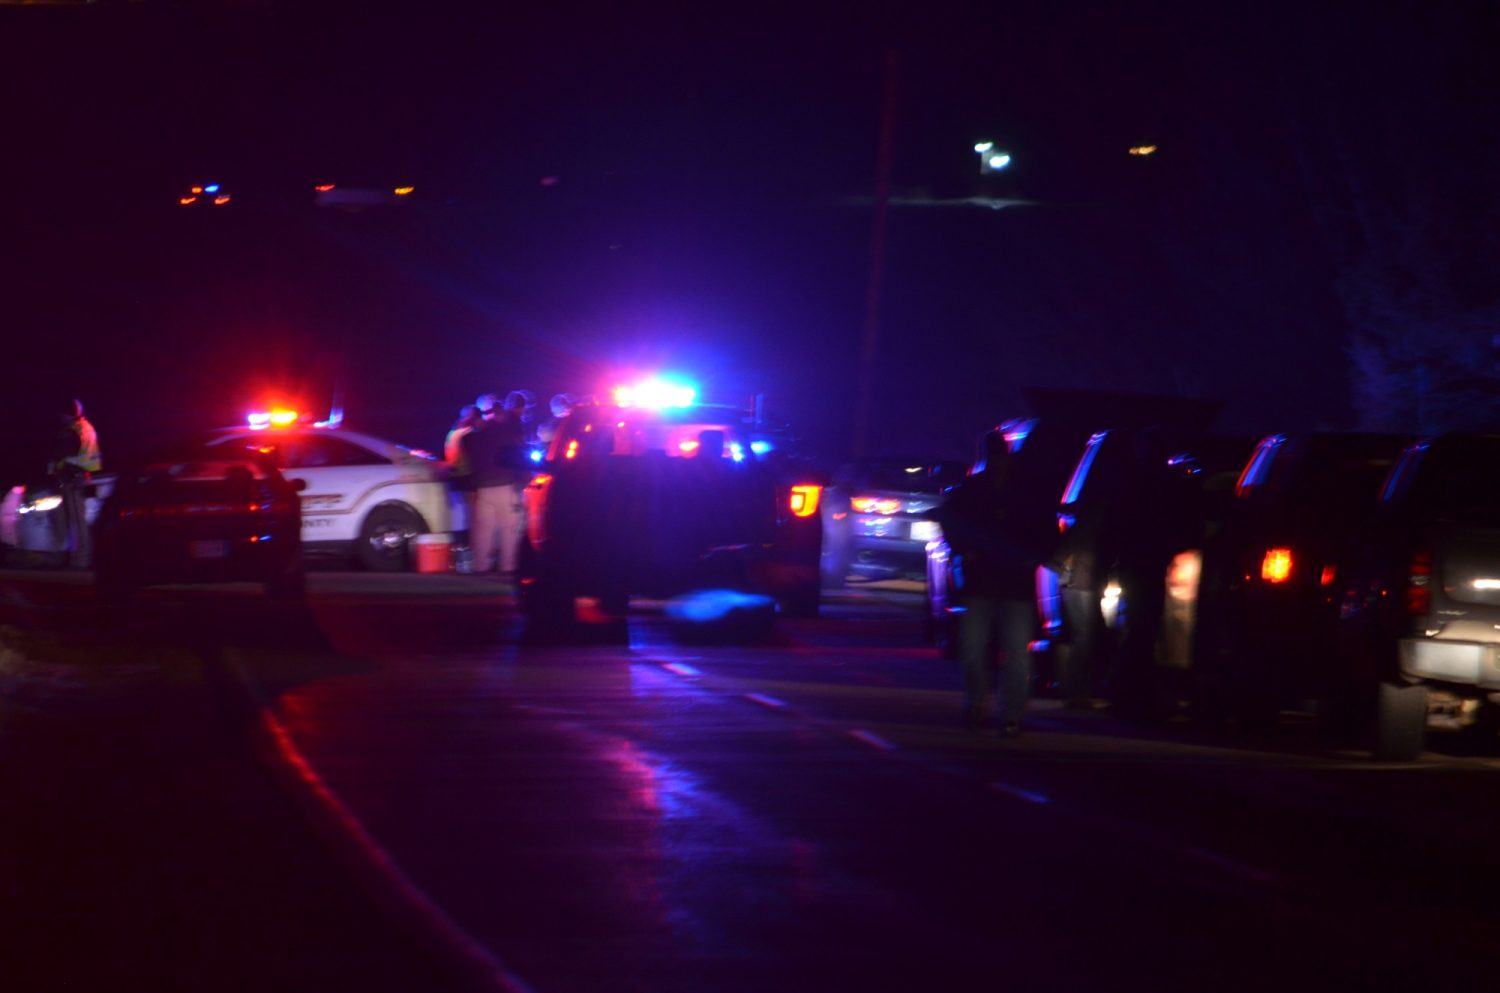 Lincoln County D.A: Deputy involved in shooting; “responded as he was trained”